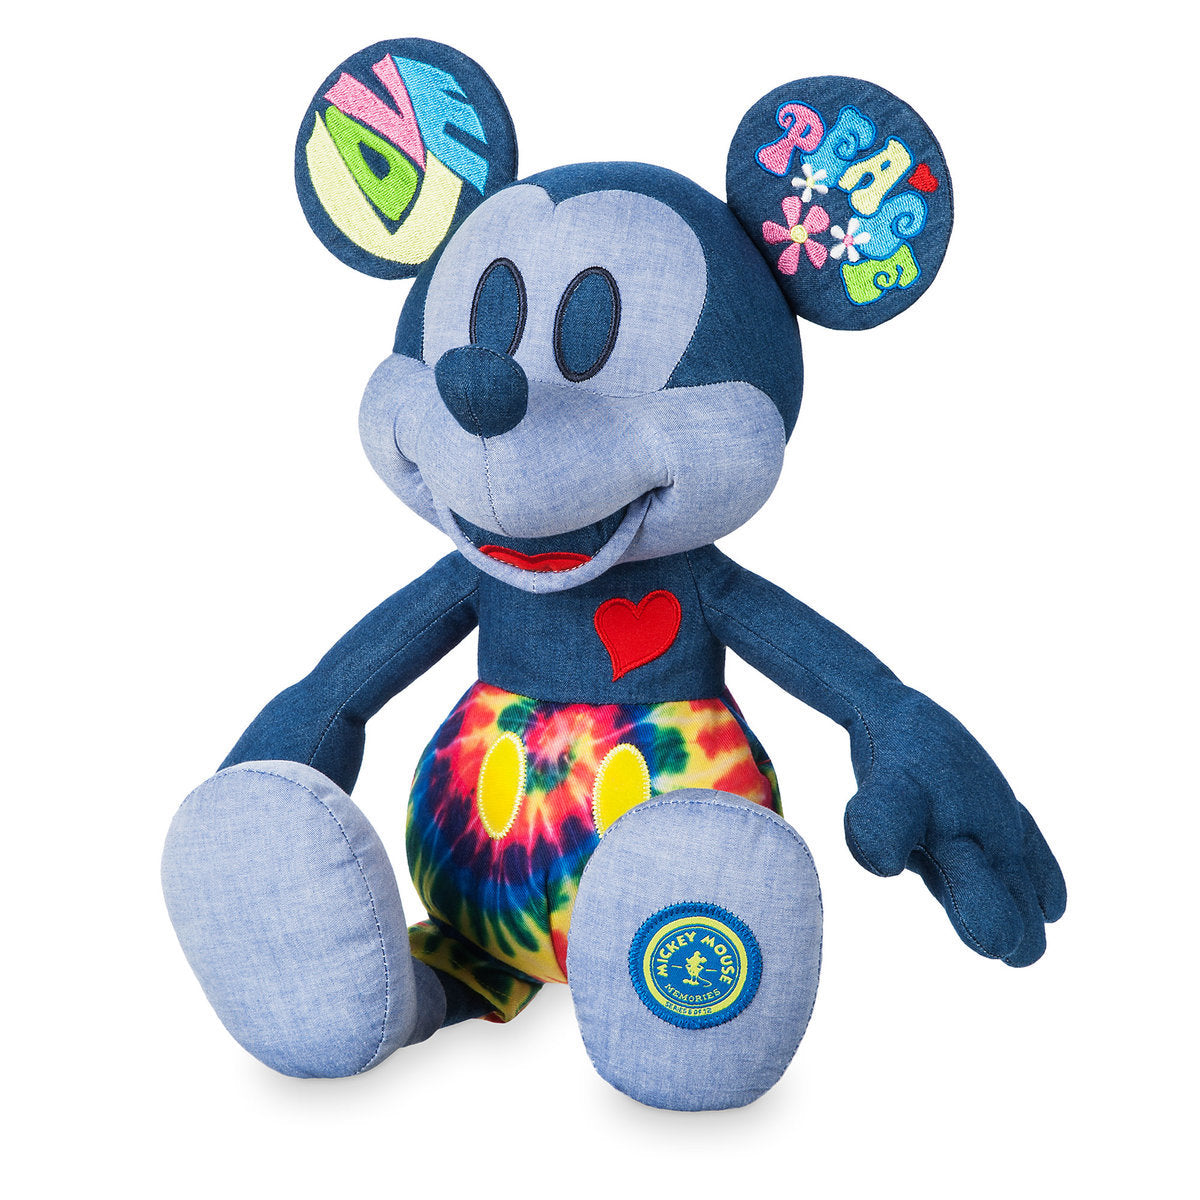 Mickey Mouse Memories Plush - June 2018 - Limited Edition